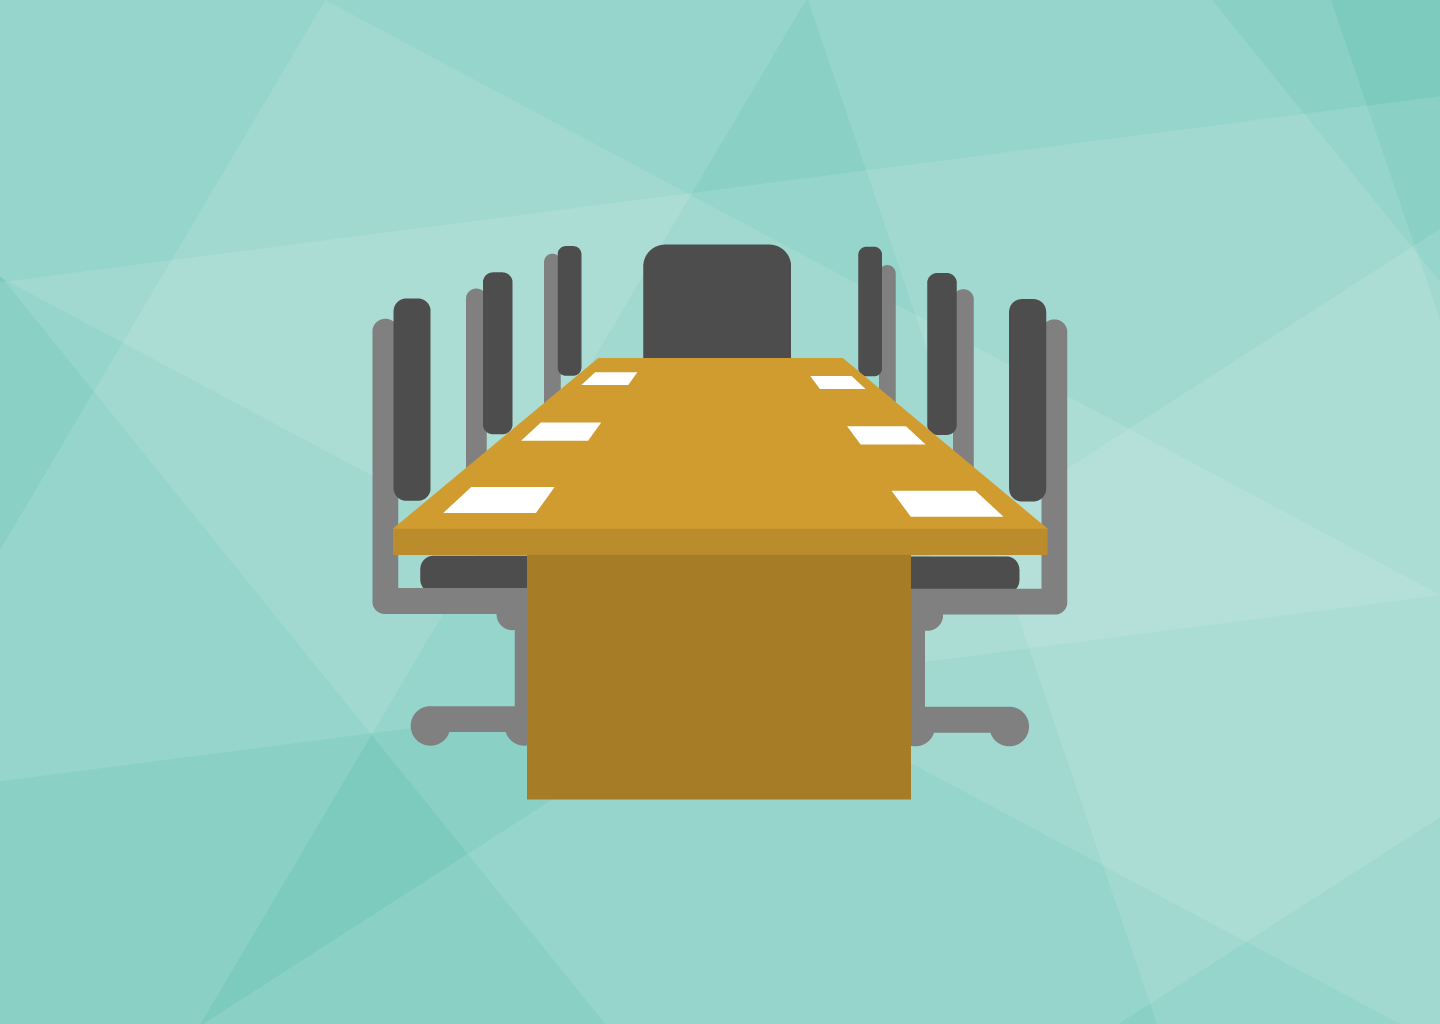 Nonprofit Boards: 7 Key Responsibilities for Good Governance